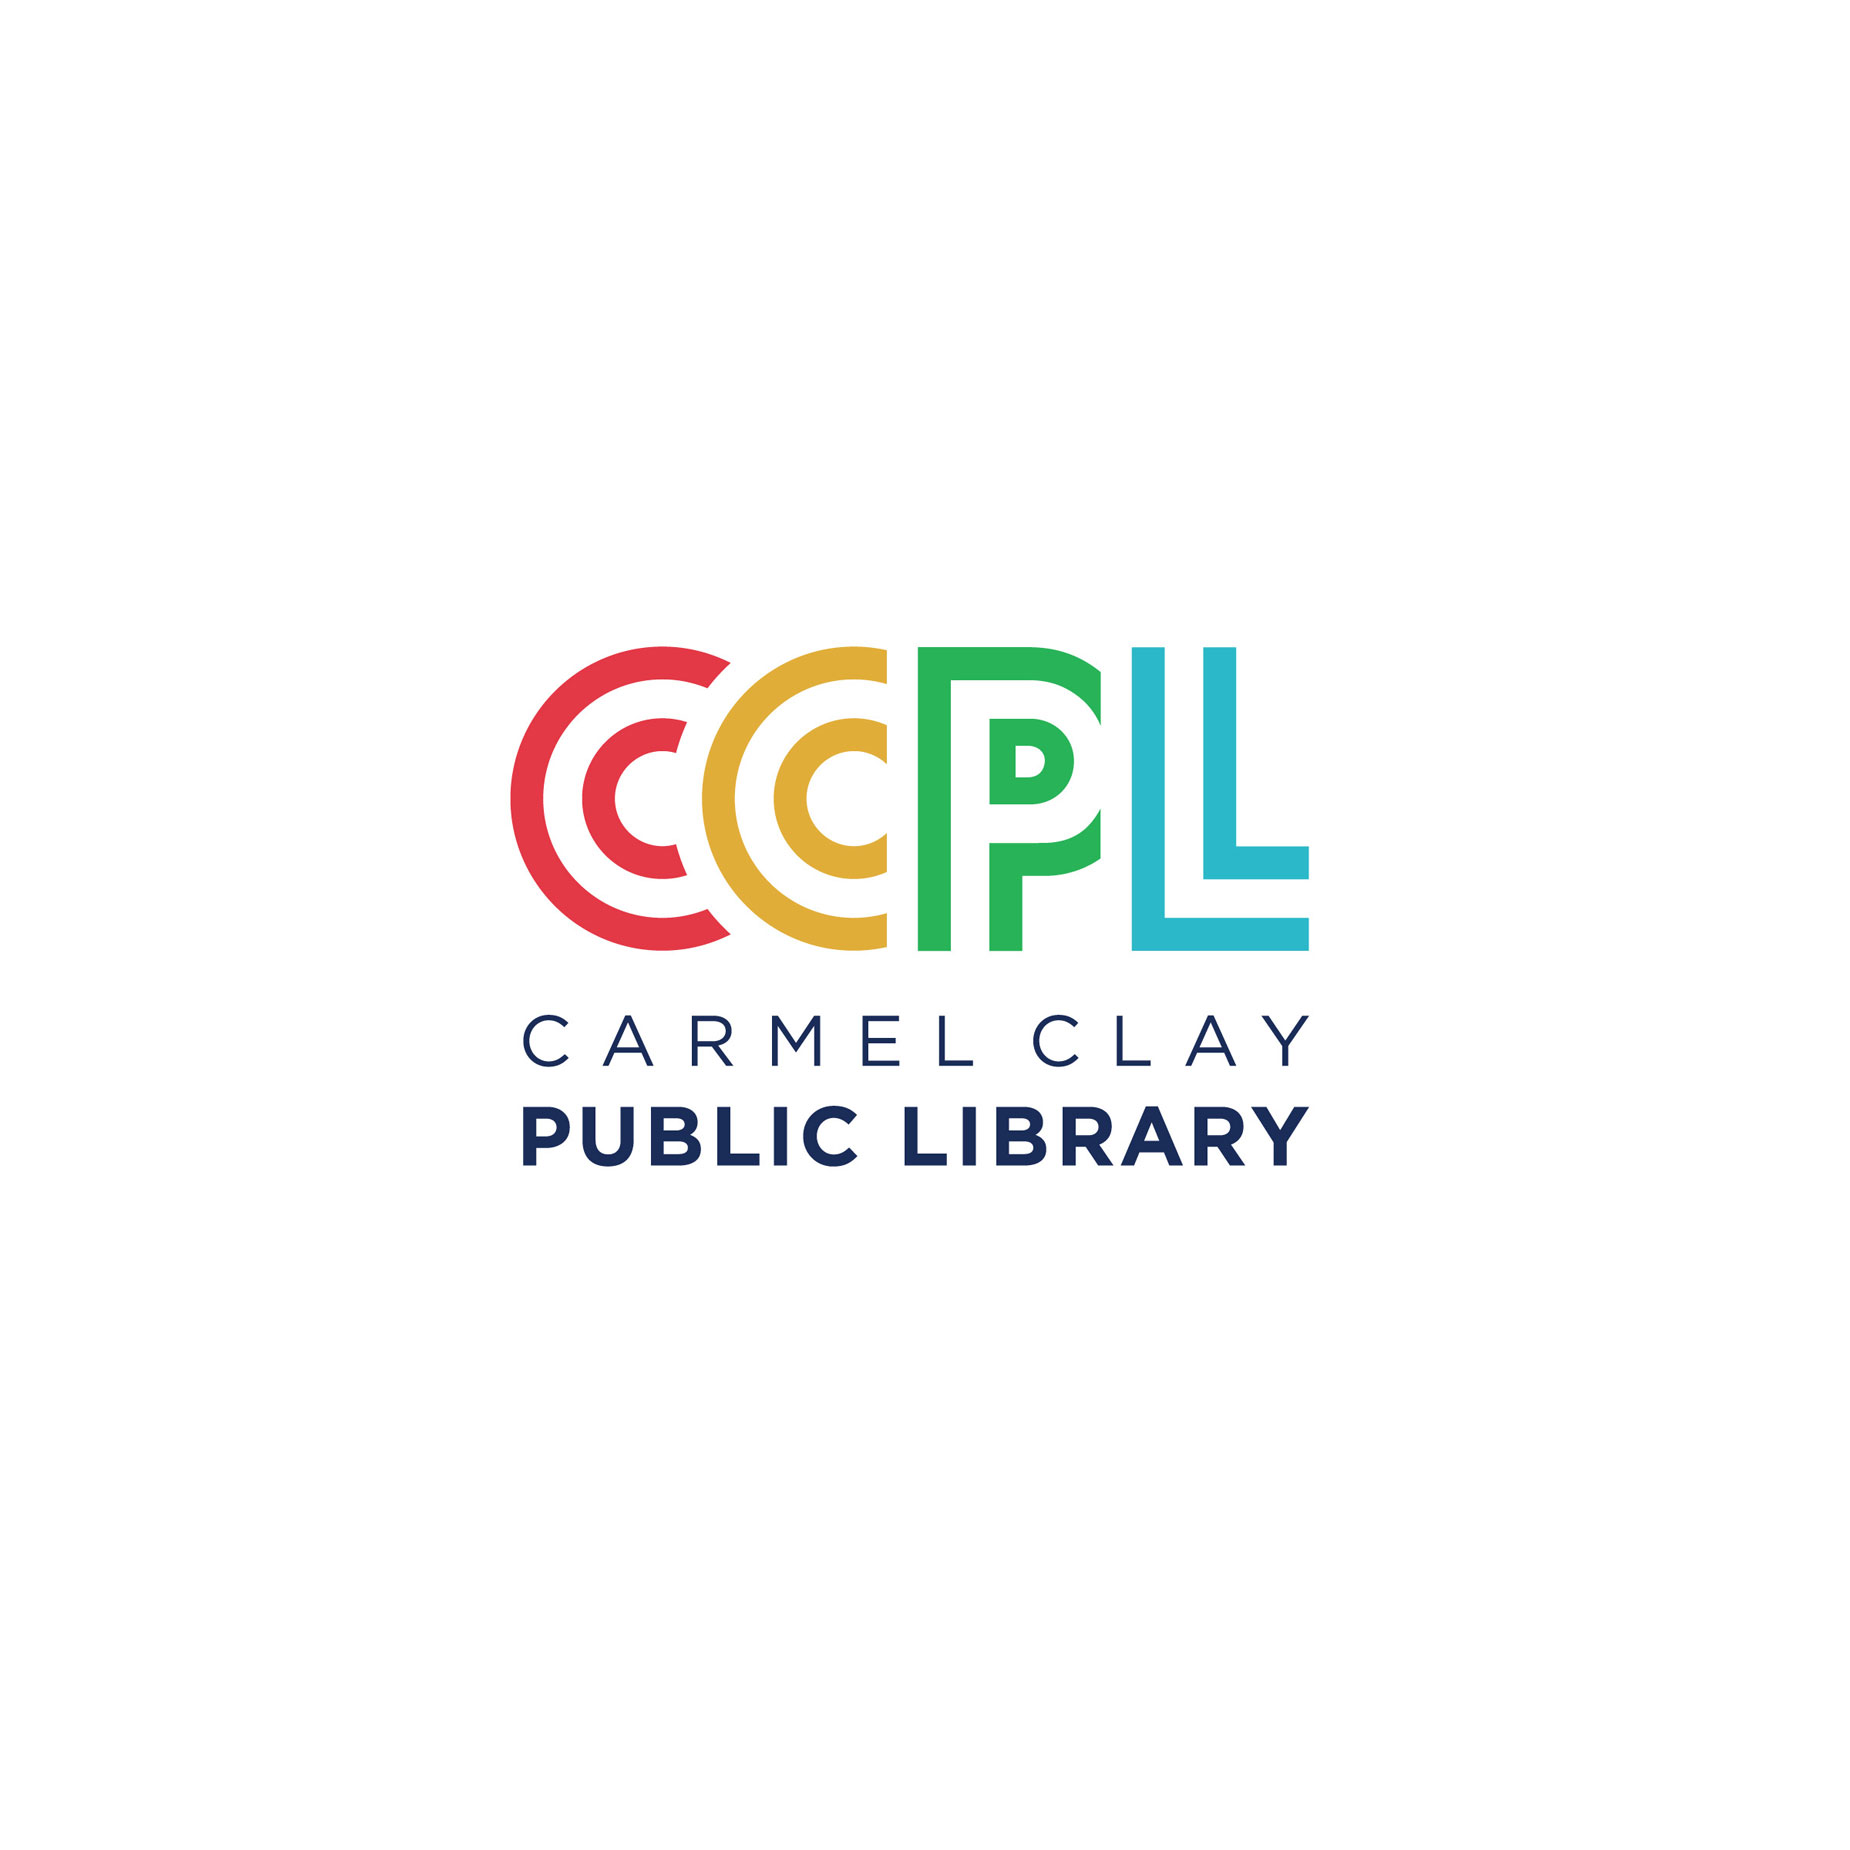 Library Logo and Branding